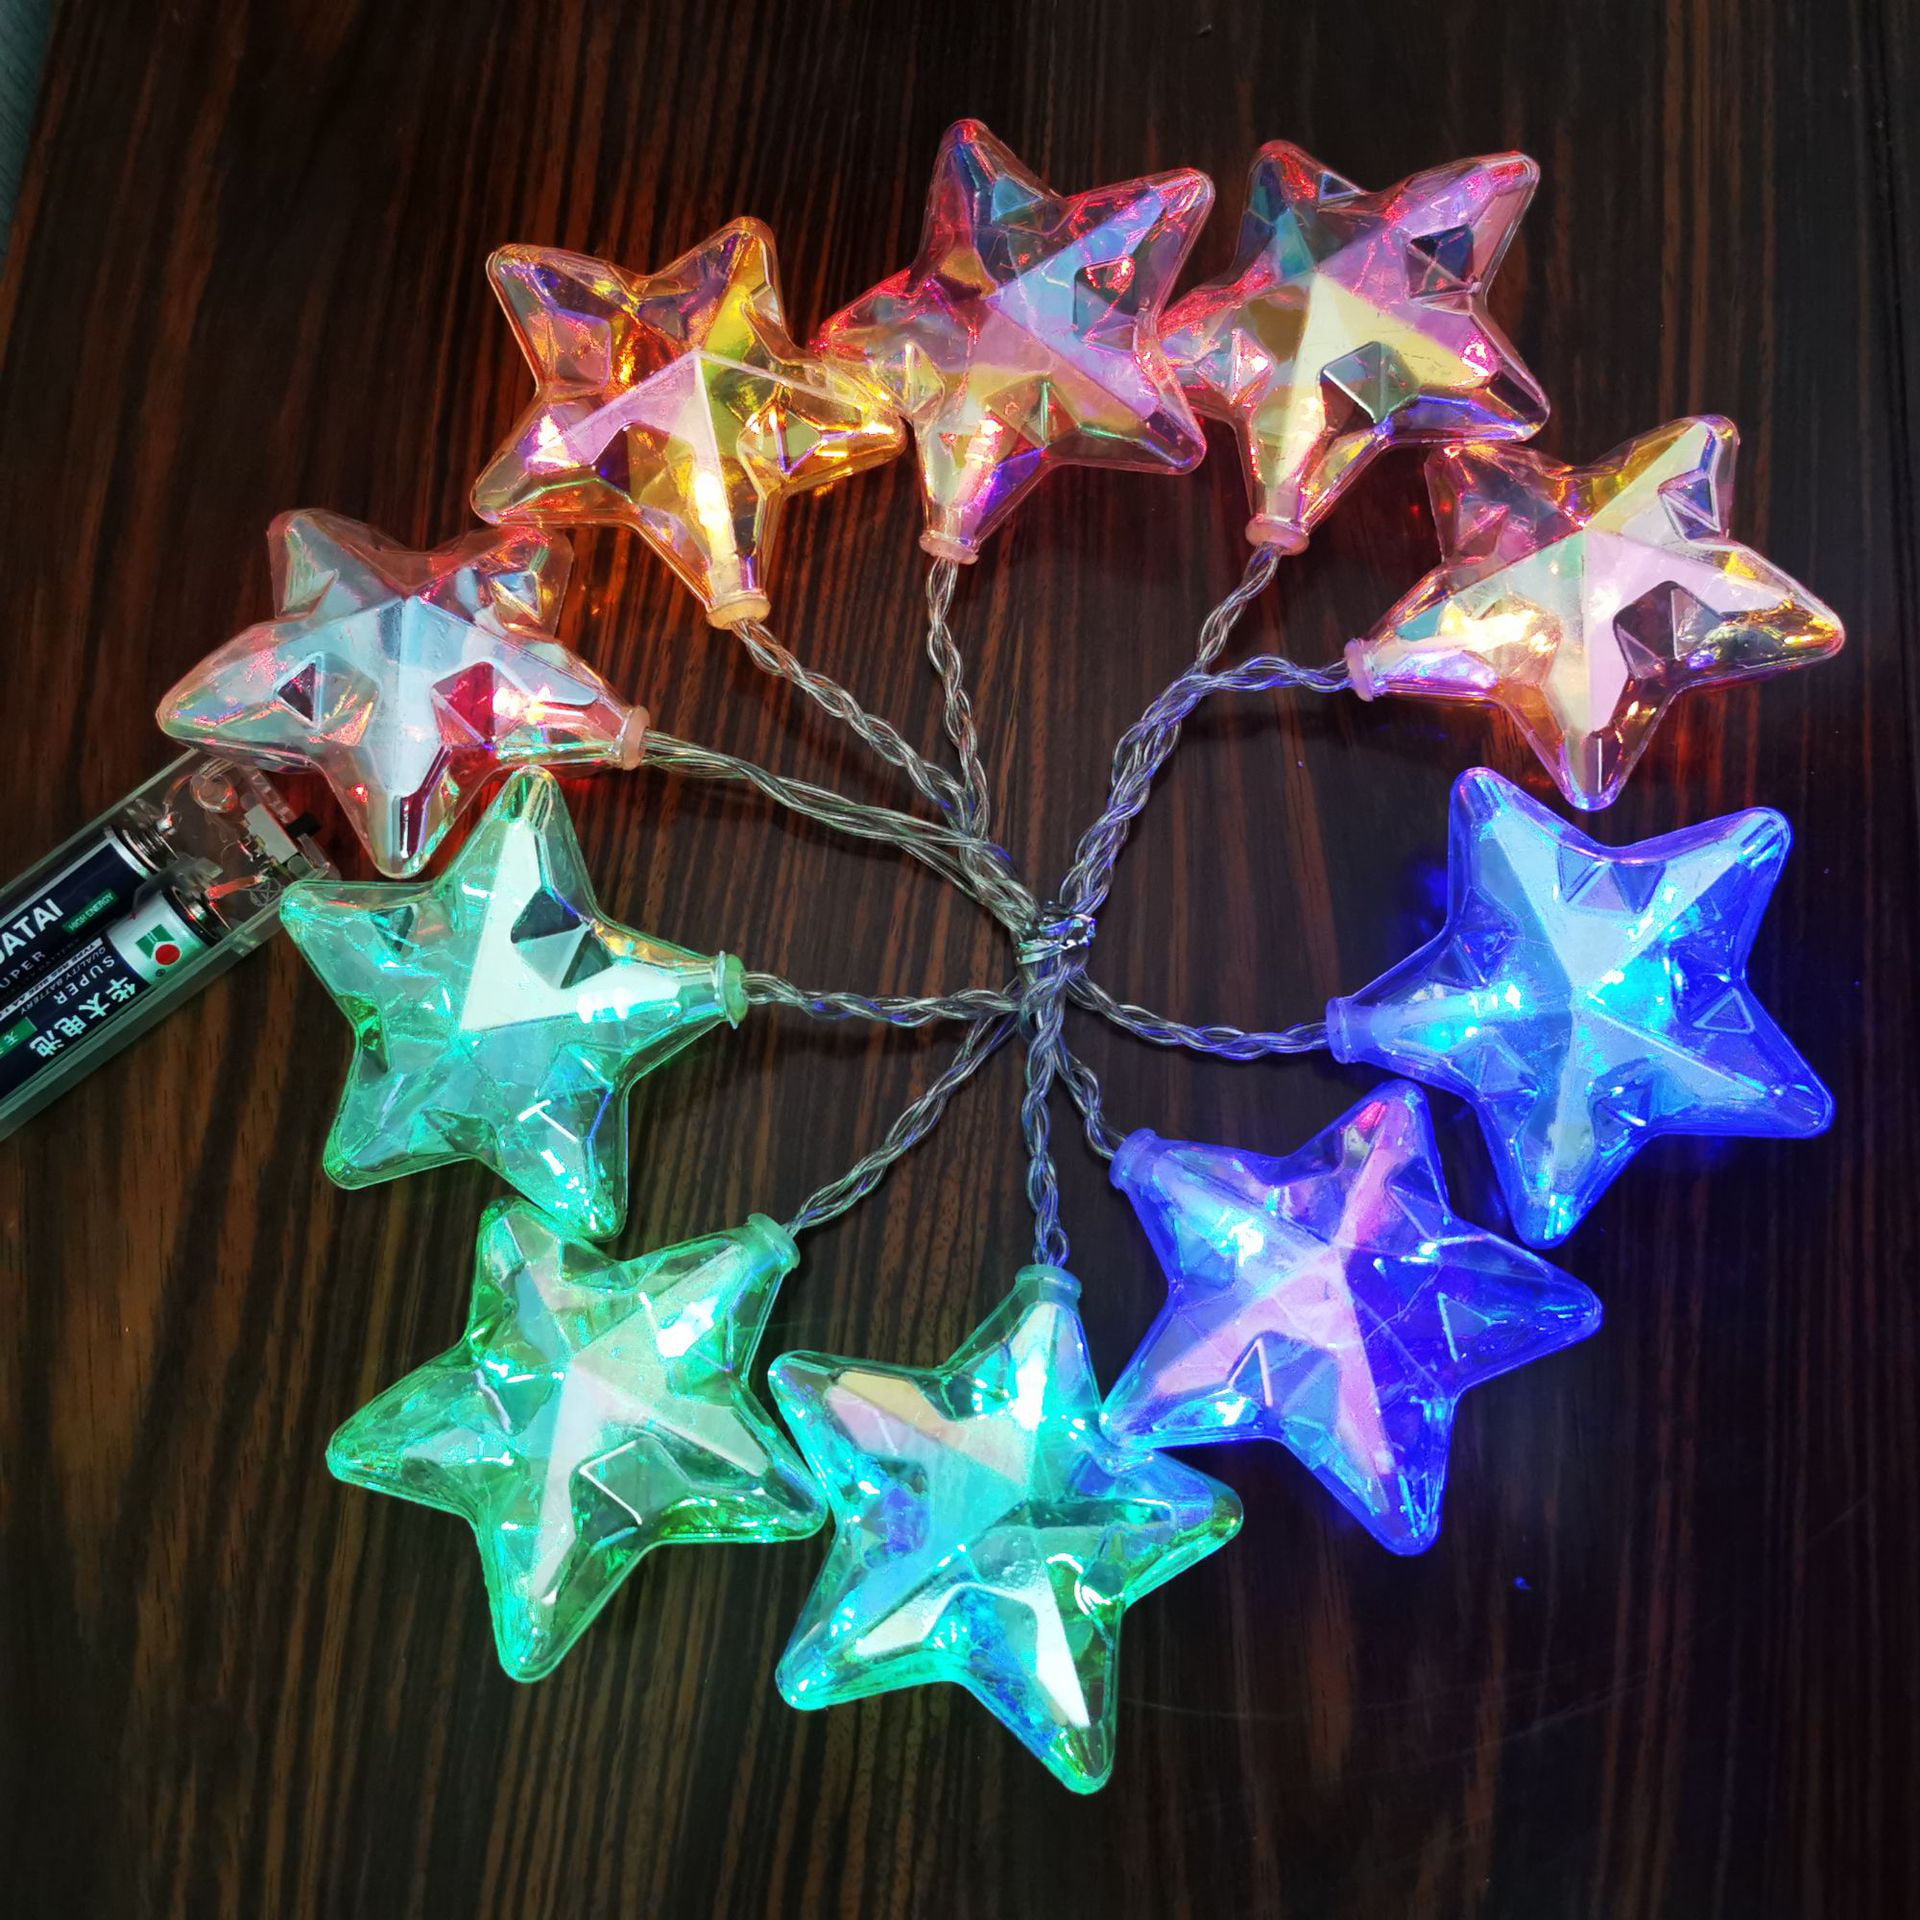 LED five-pointed star light string, colorful electroplating star lights,  room dormitory decoration lights, holiday lights,multicolour,19.6 ft 40  lamp battery model with flashing,F85485 